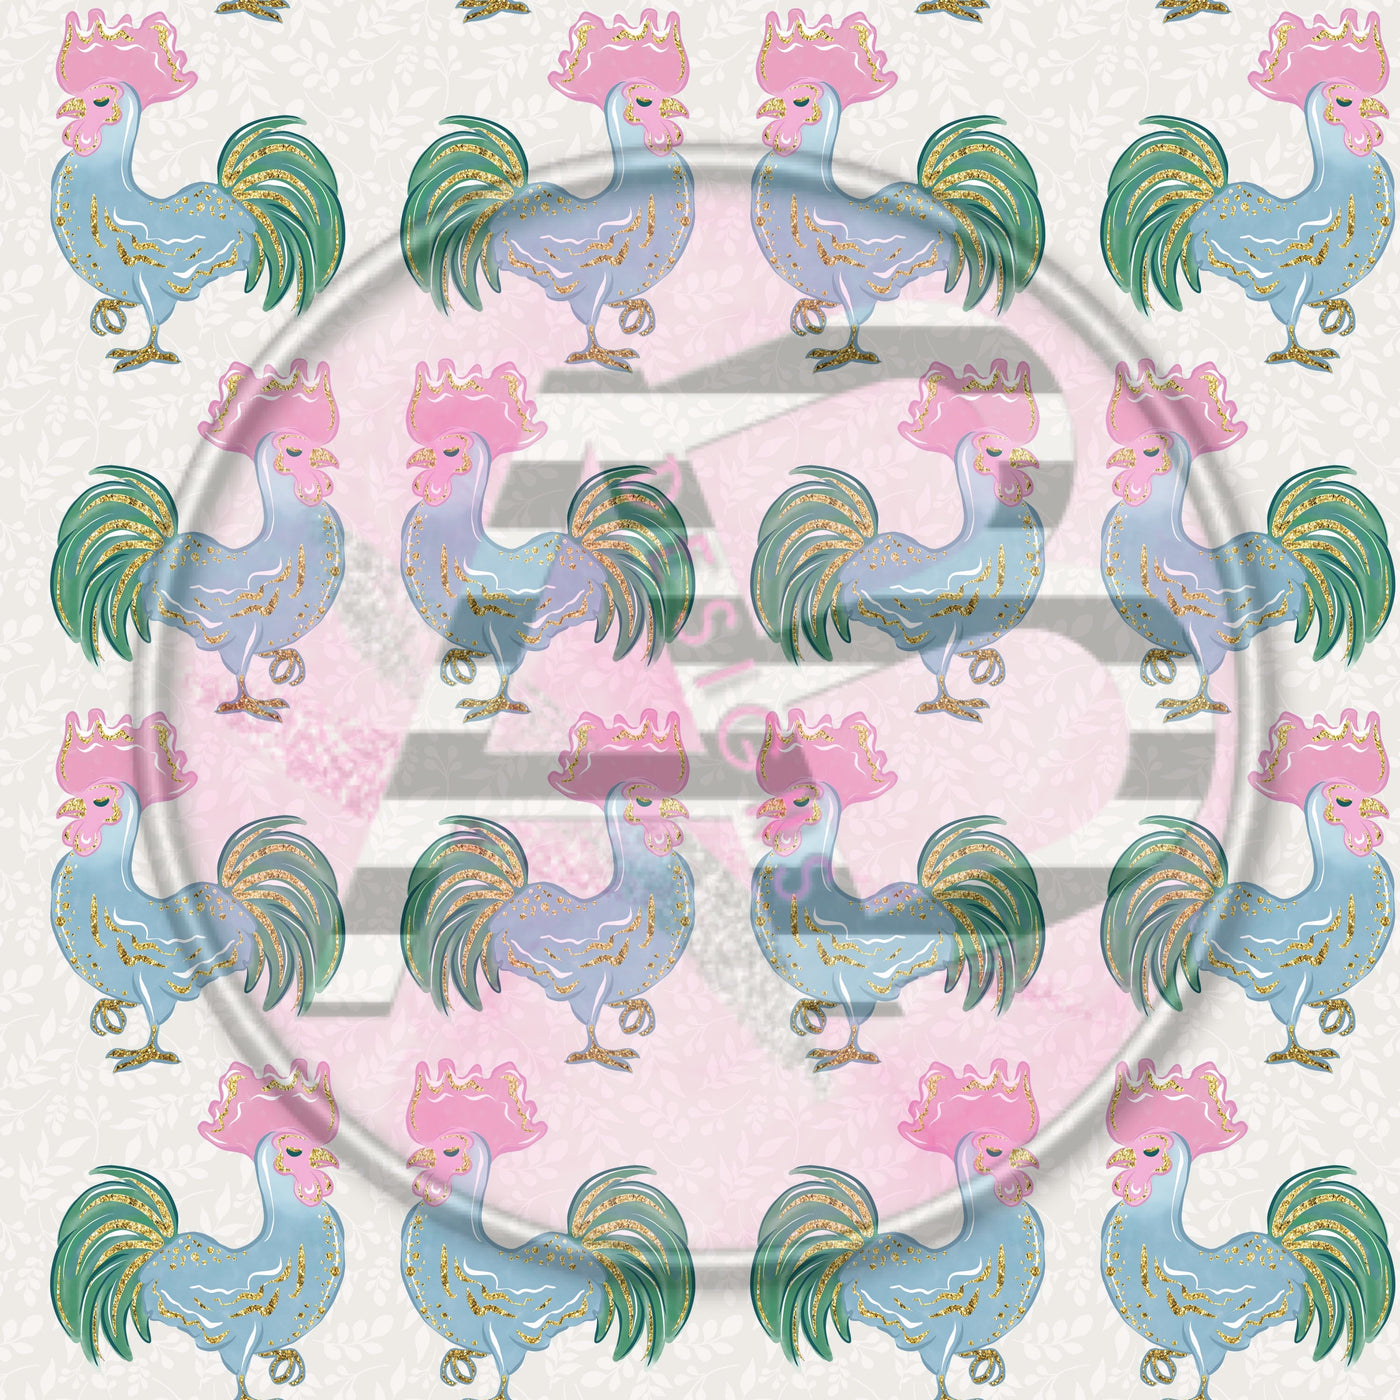 Adhesive Patterned Vinyl - Rooster 2001